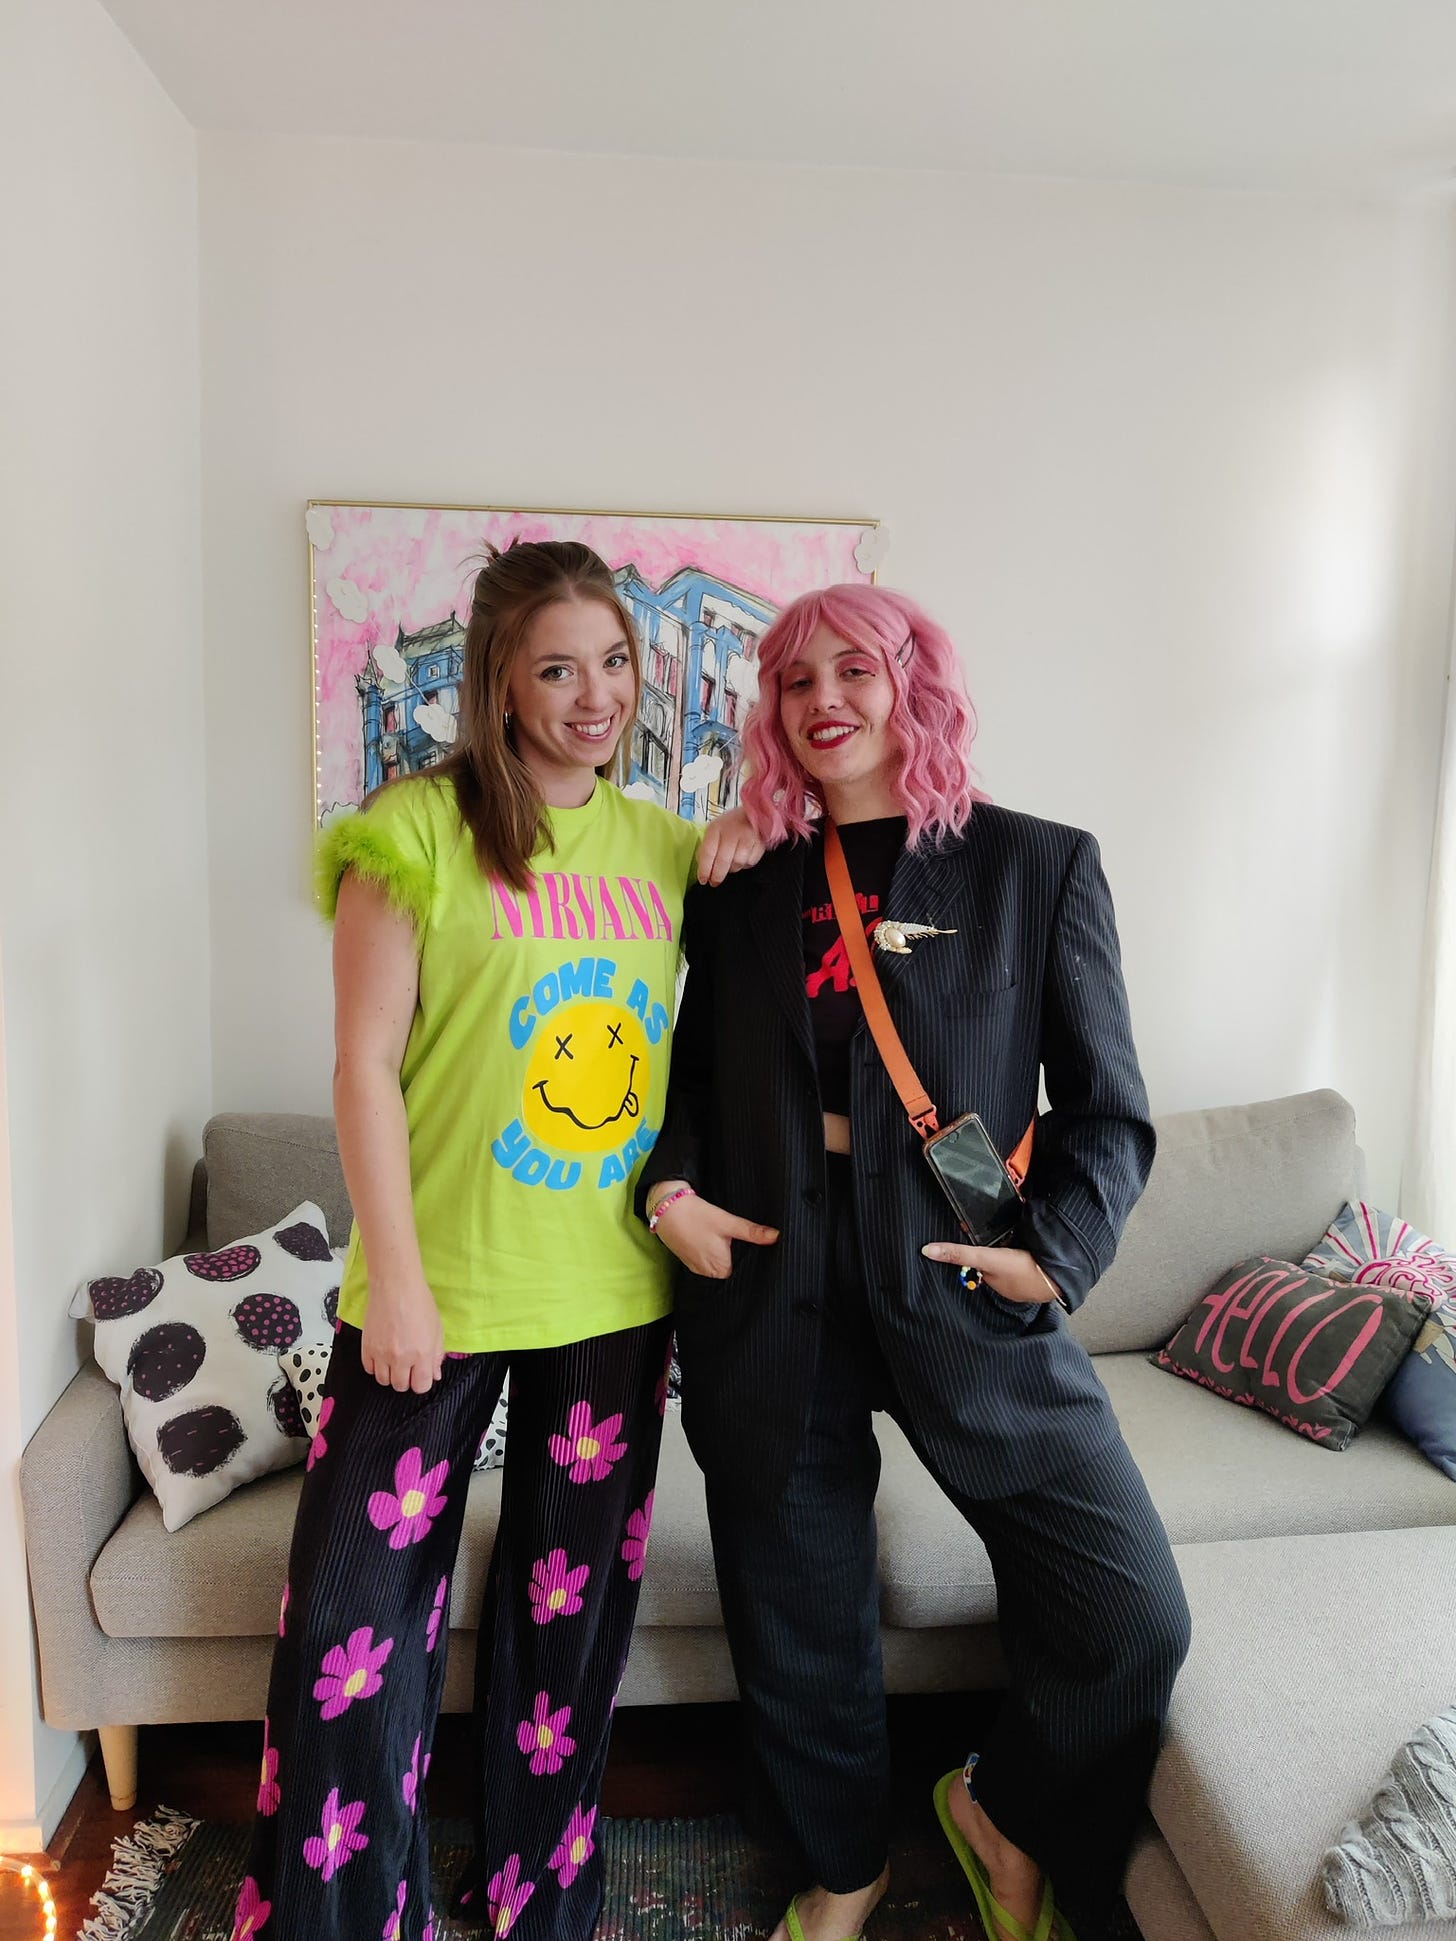 Kelly and Larissa smiling, smizing, thriving. Kelly wears a neon green tee and pink and black floral pants. Larissa wears a black ensemble and pink wig.